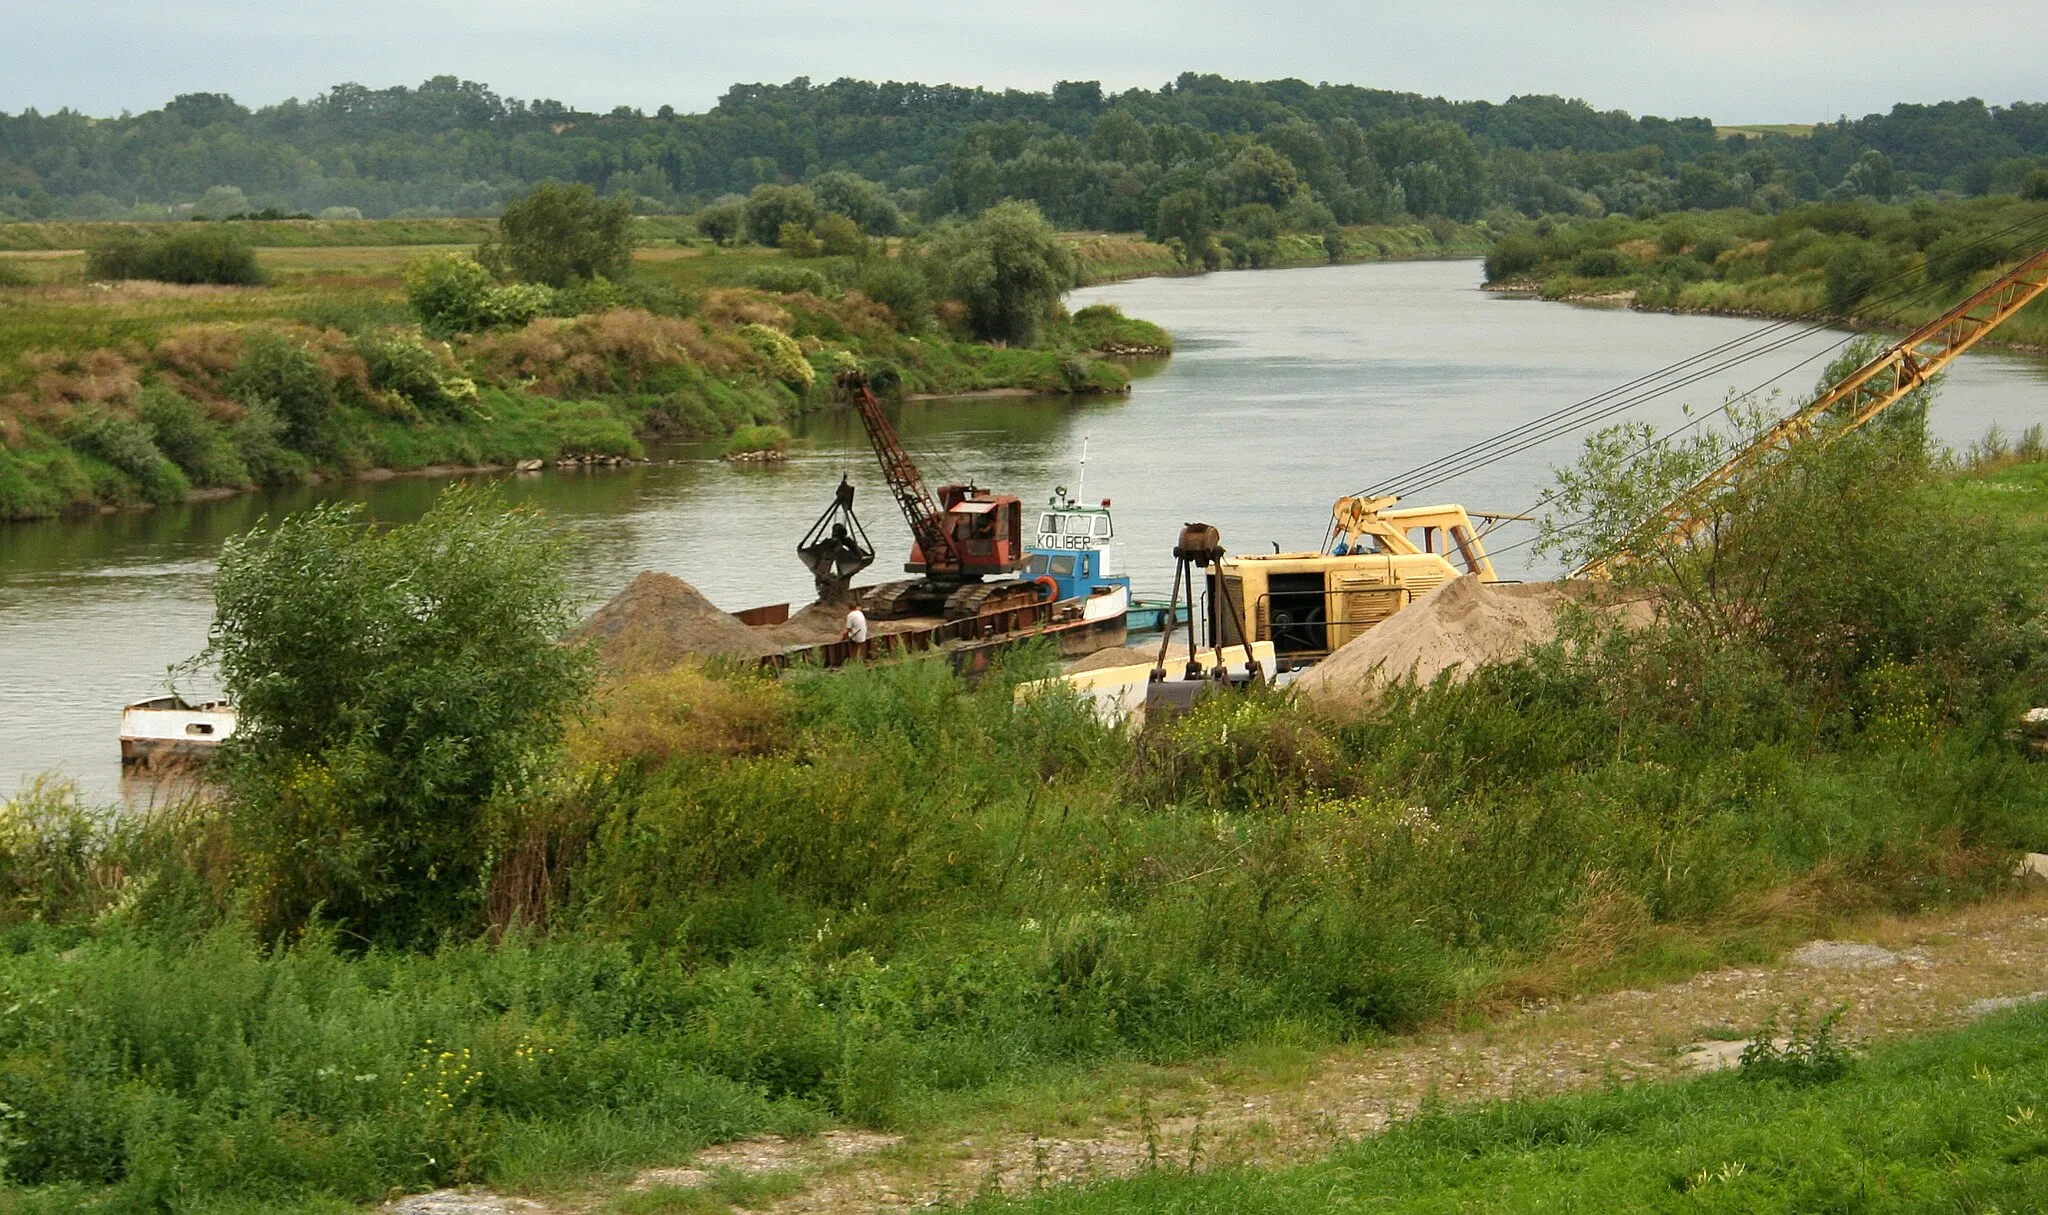 Photo showing: The Wisła river